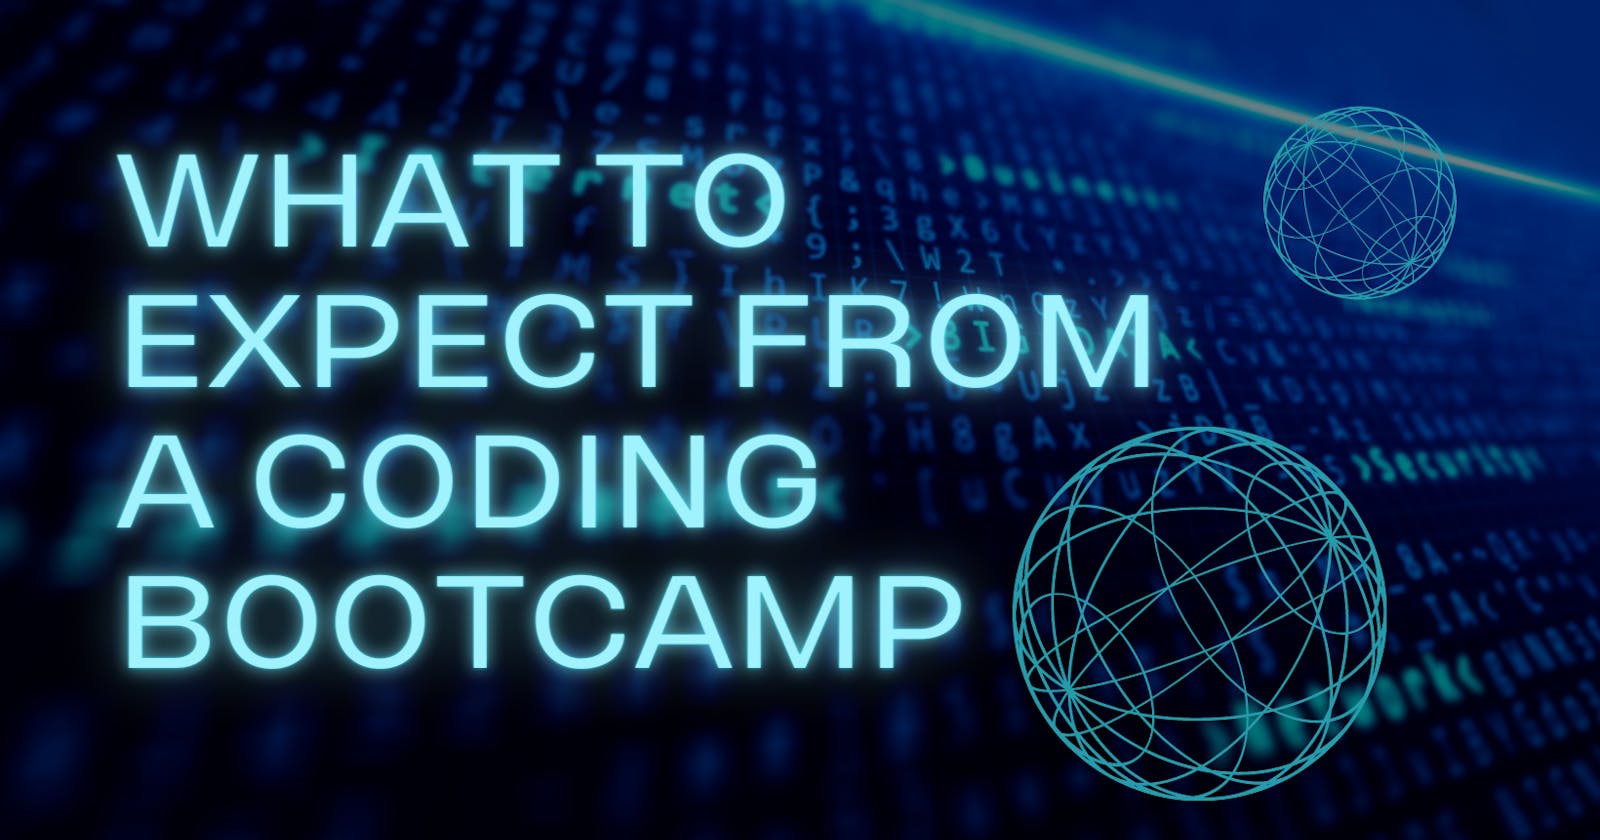 What To Expect from A Coding Bootcamp